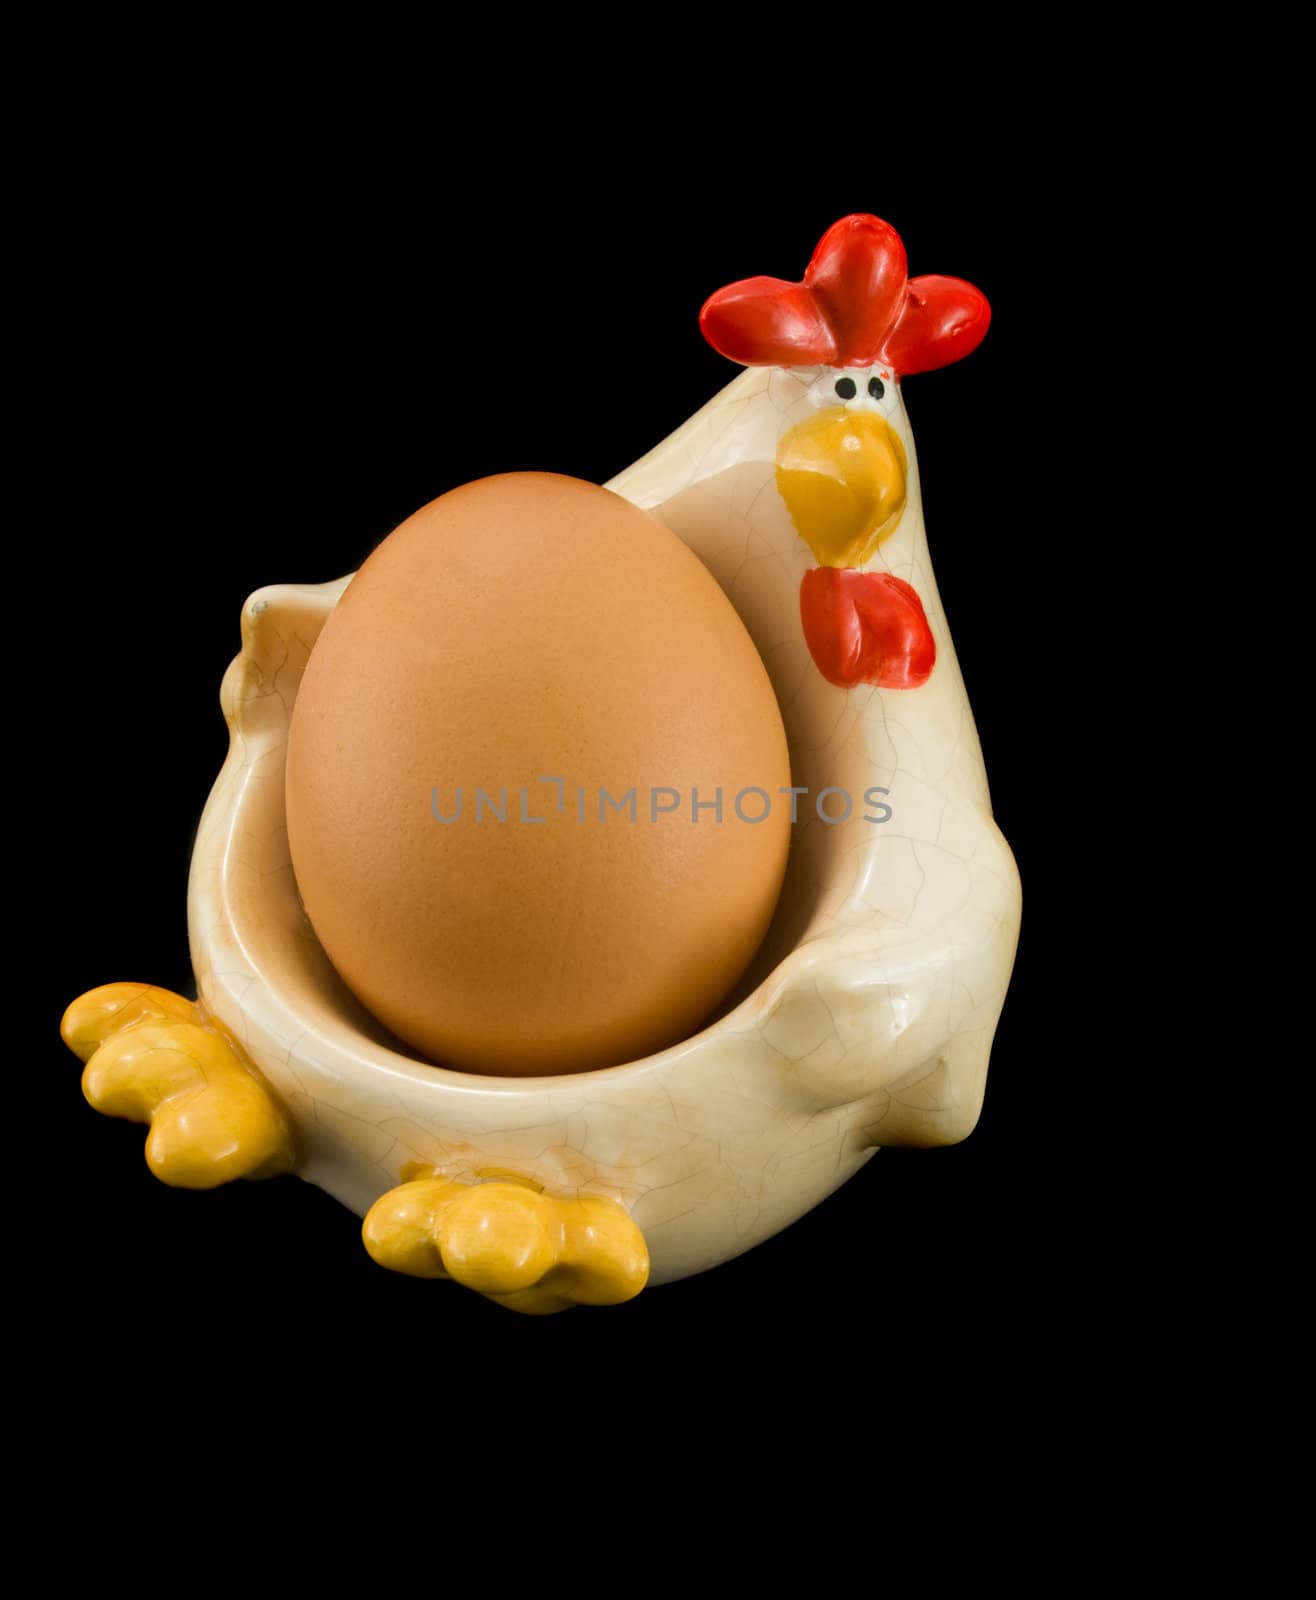 Chicken holding egg, isolated on black background.